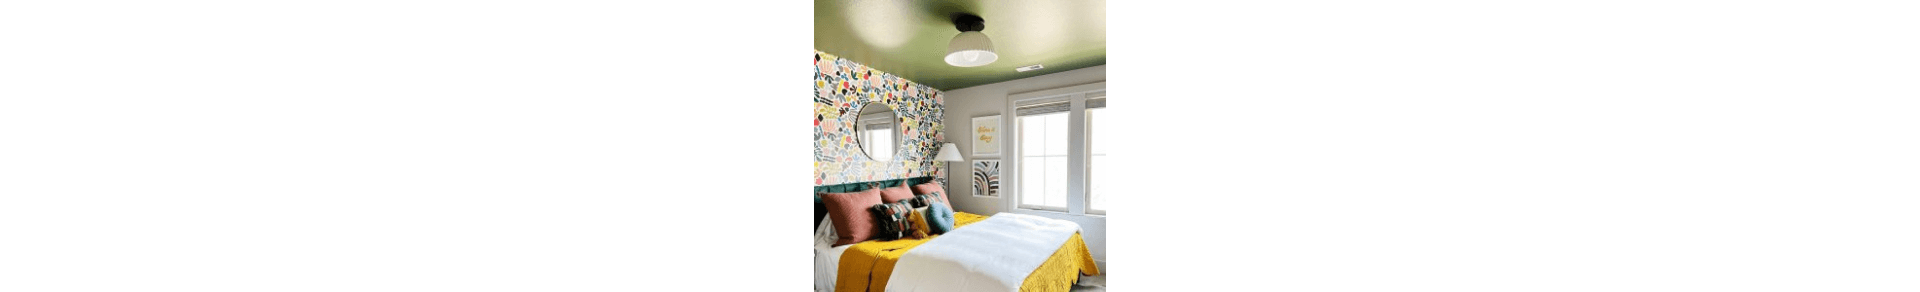 A retro style bedroom with a yellow-green painted ceiling and walls with wallpaper and white paint.